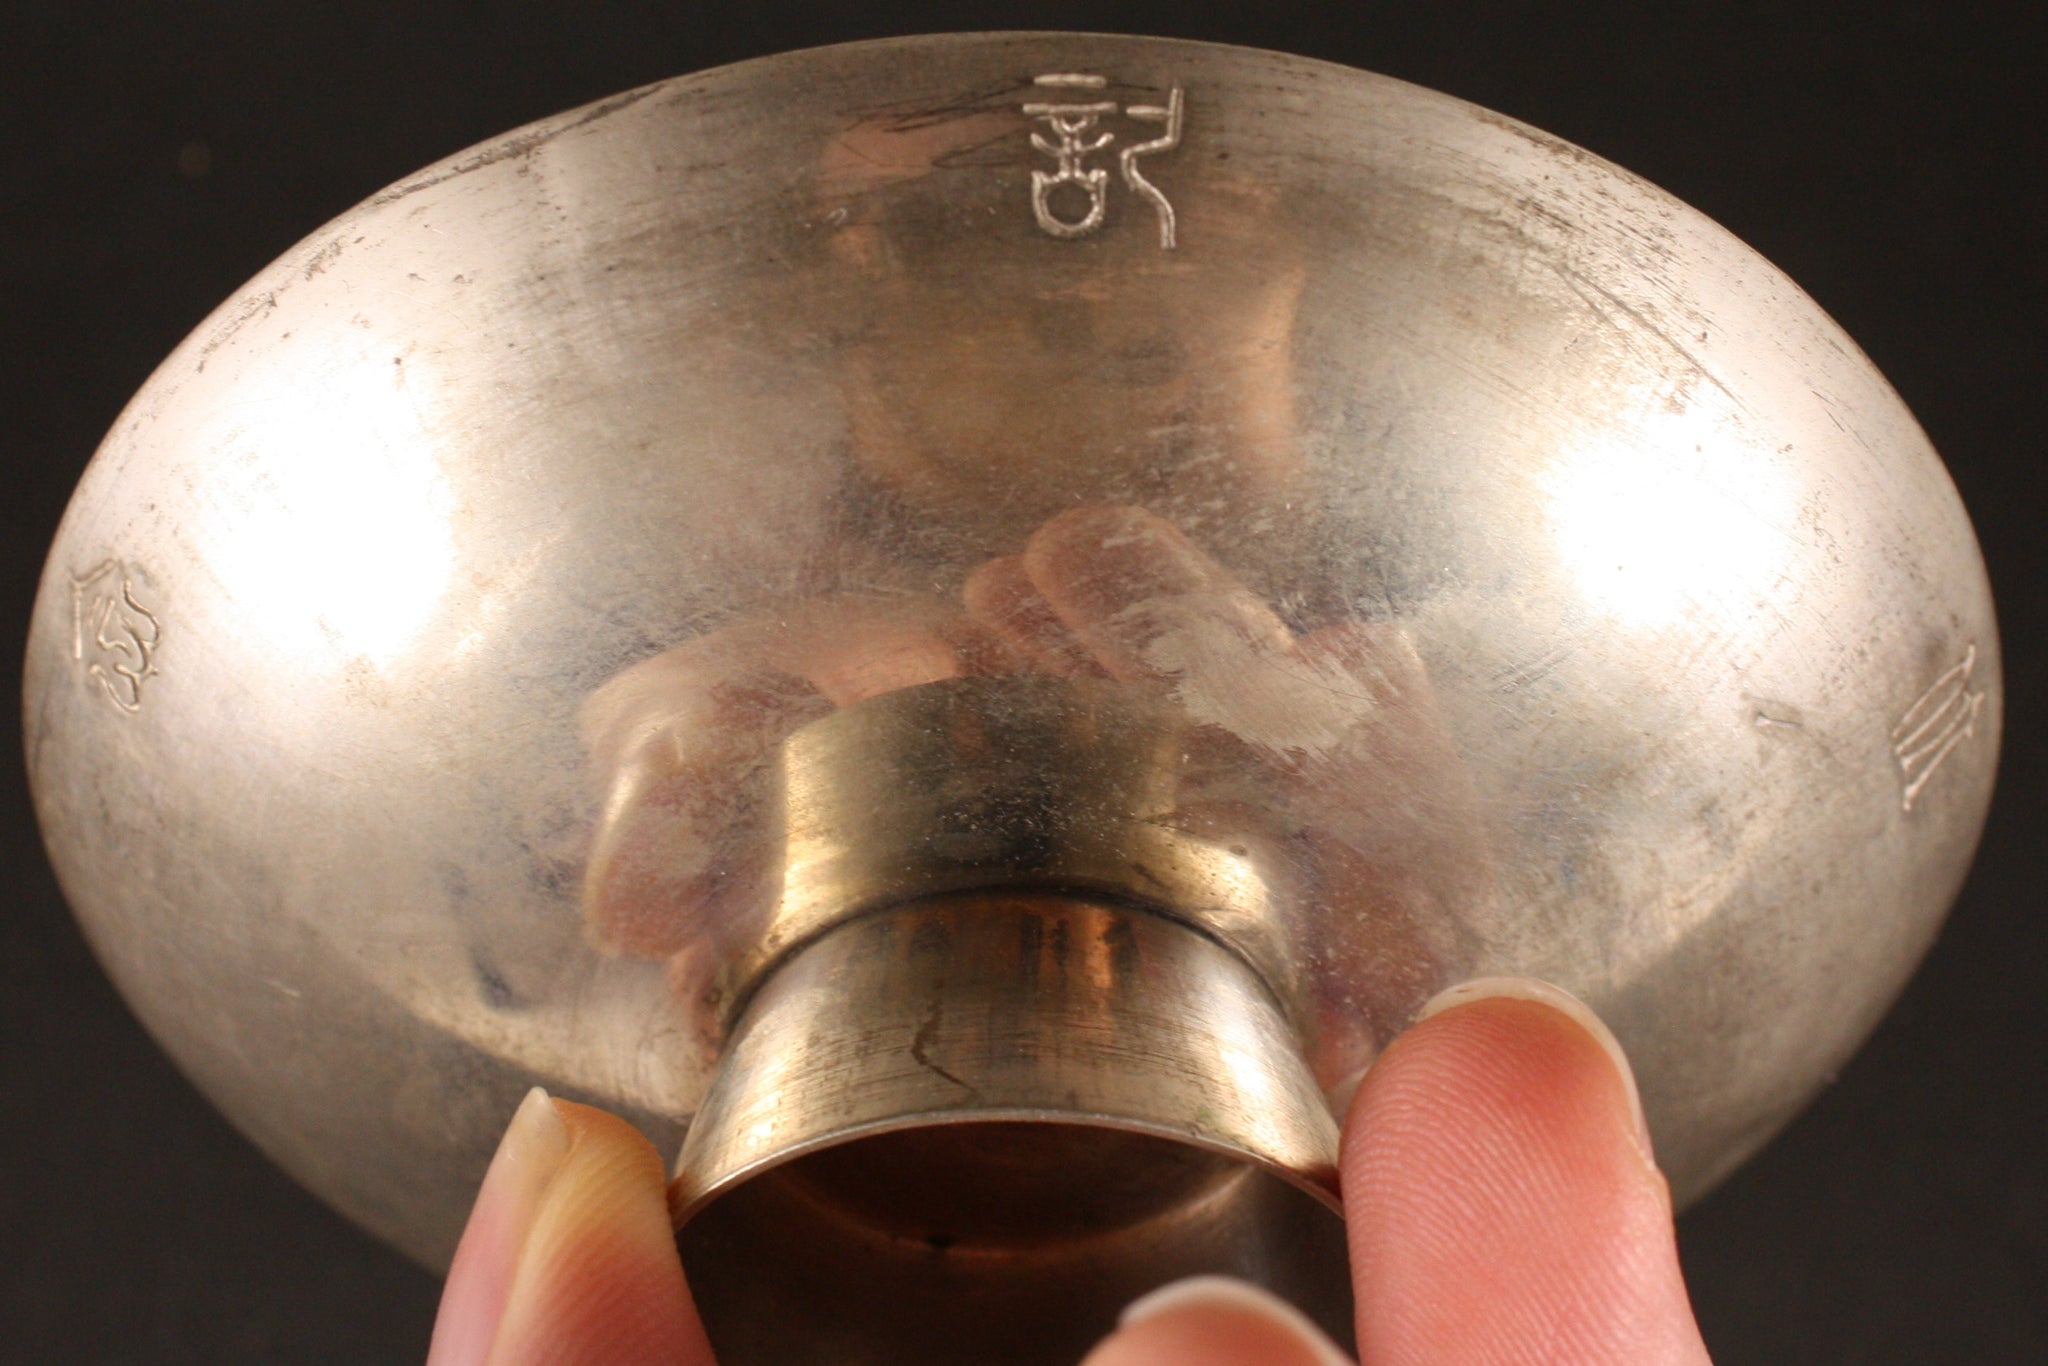 Antique Japanese Military Personnel Education Association Enthronment Silver Army Sake Cup